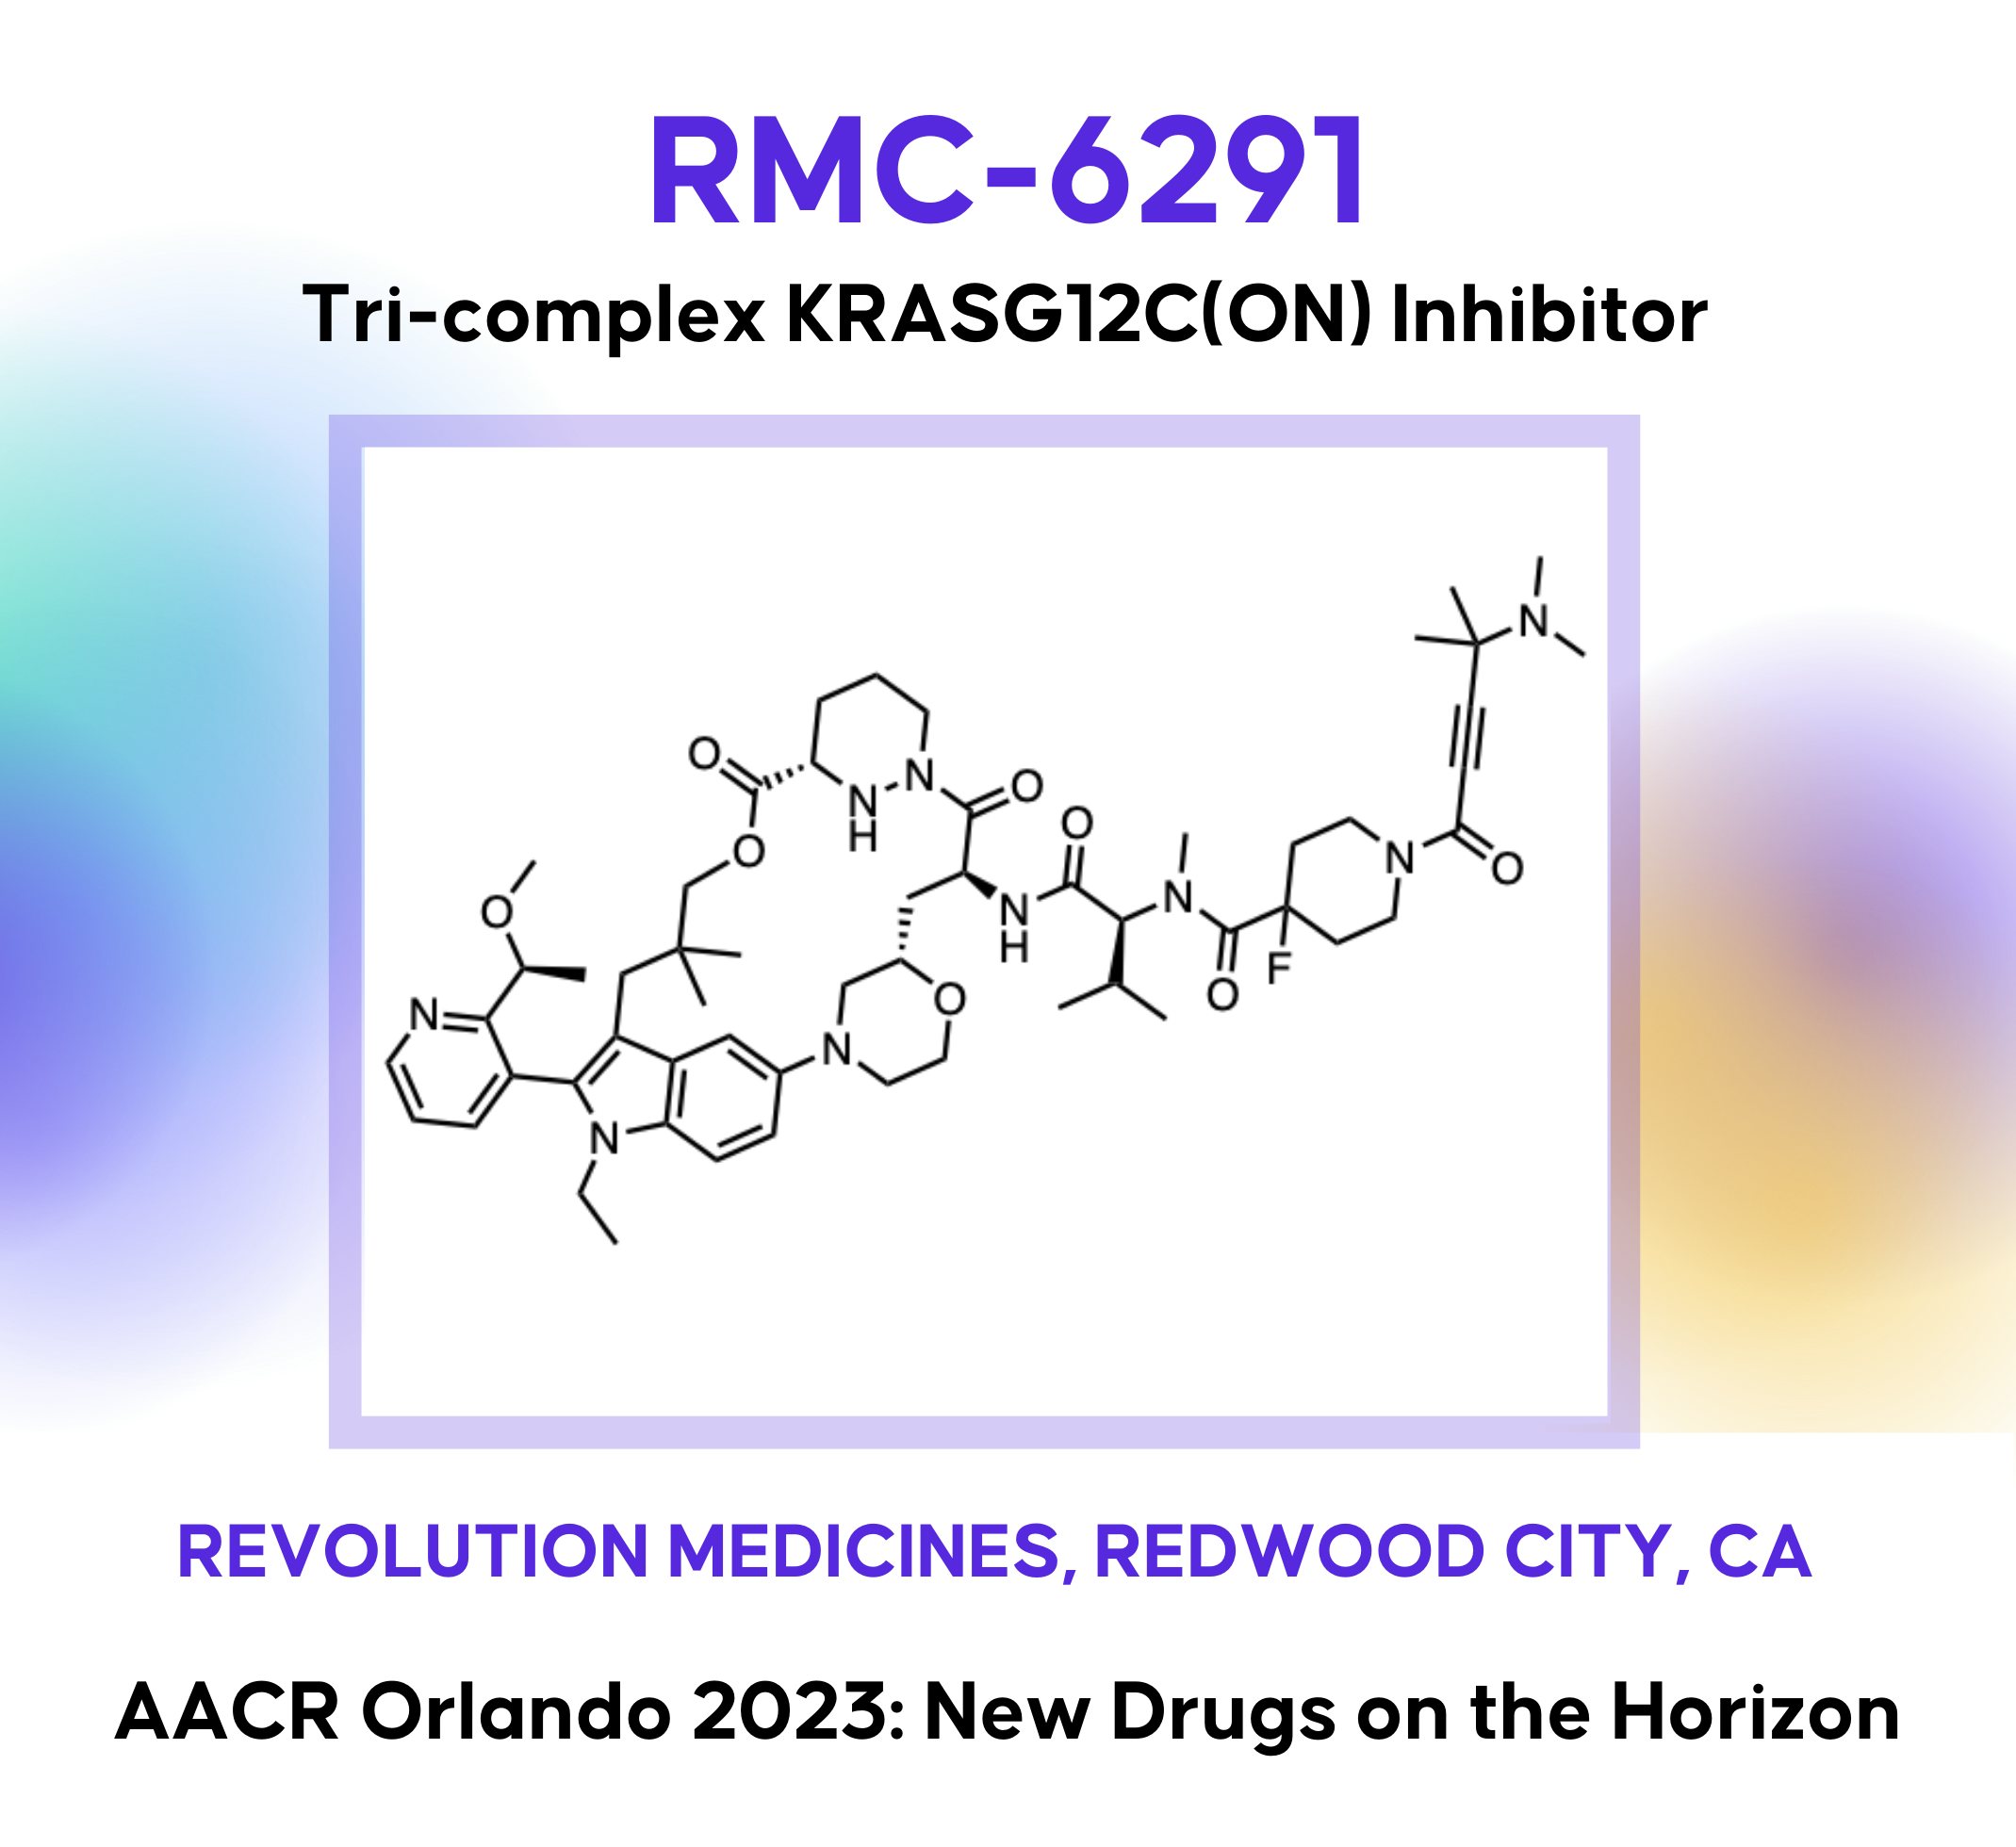 RMC-6291 chemical structure - Revolution Medicines KRASG12C ON Tricomplex Inhibitor Structure